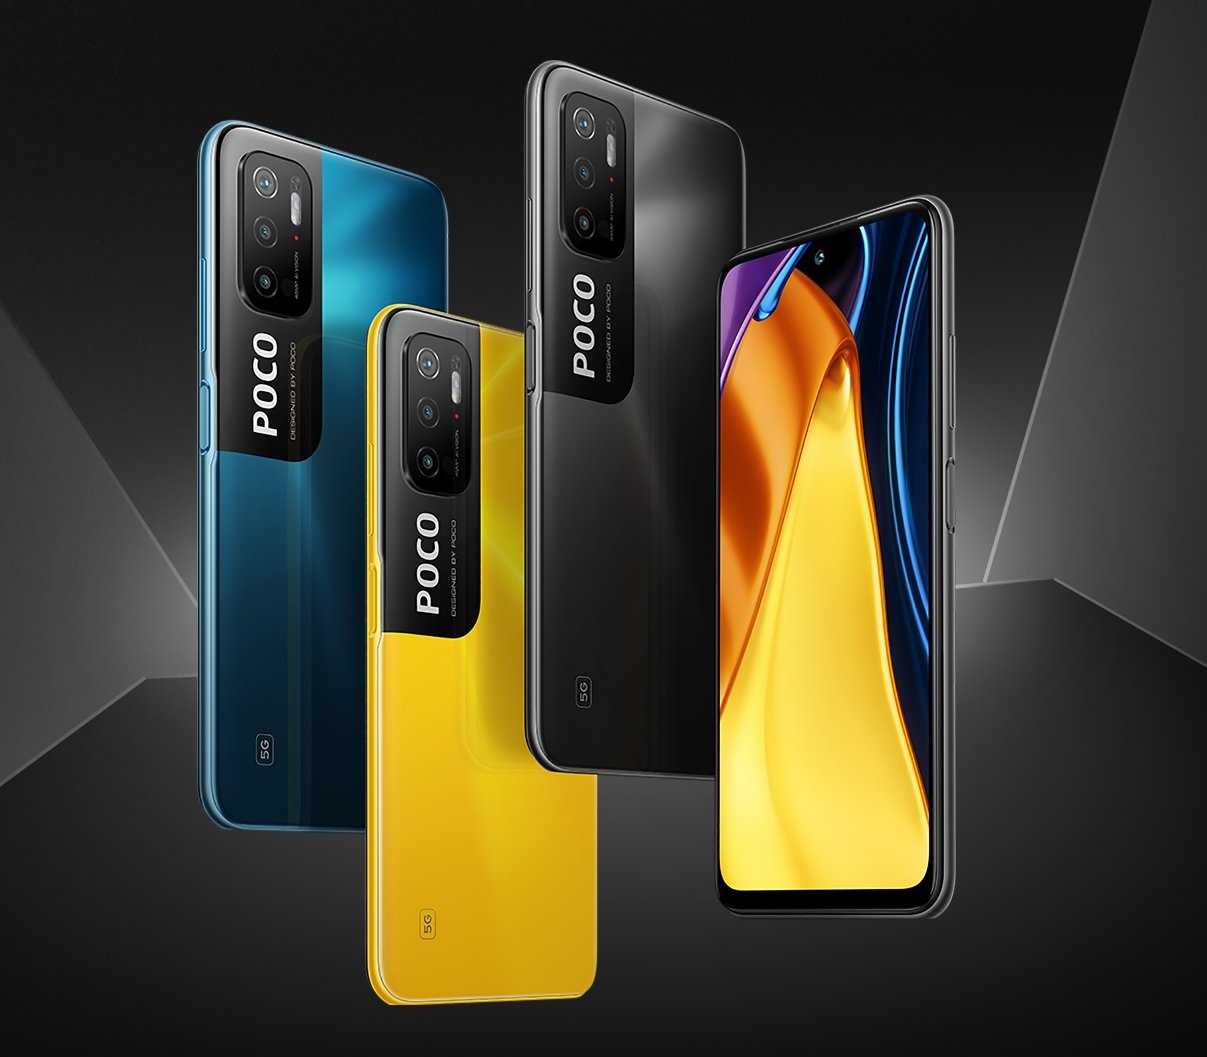 Xiaomi sets a release date for the POCO M3 Pro 5G, a budget handset with a MediaTek Dimensity 700 SoC and an eye-catching design - NotebookCheck.net News